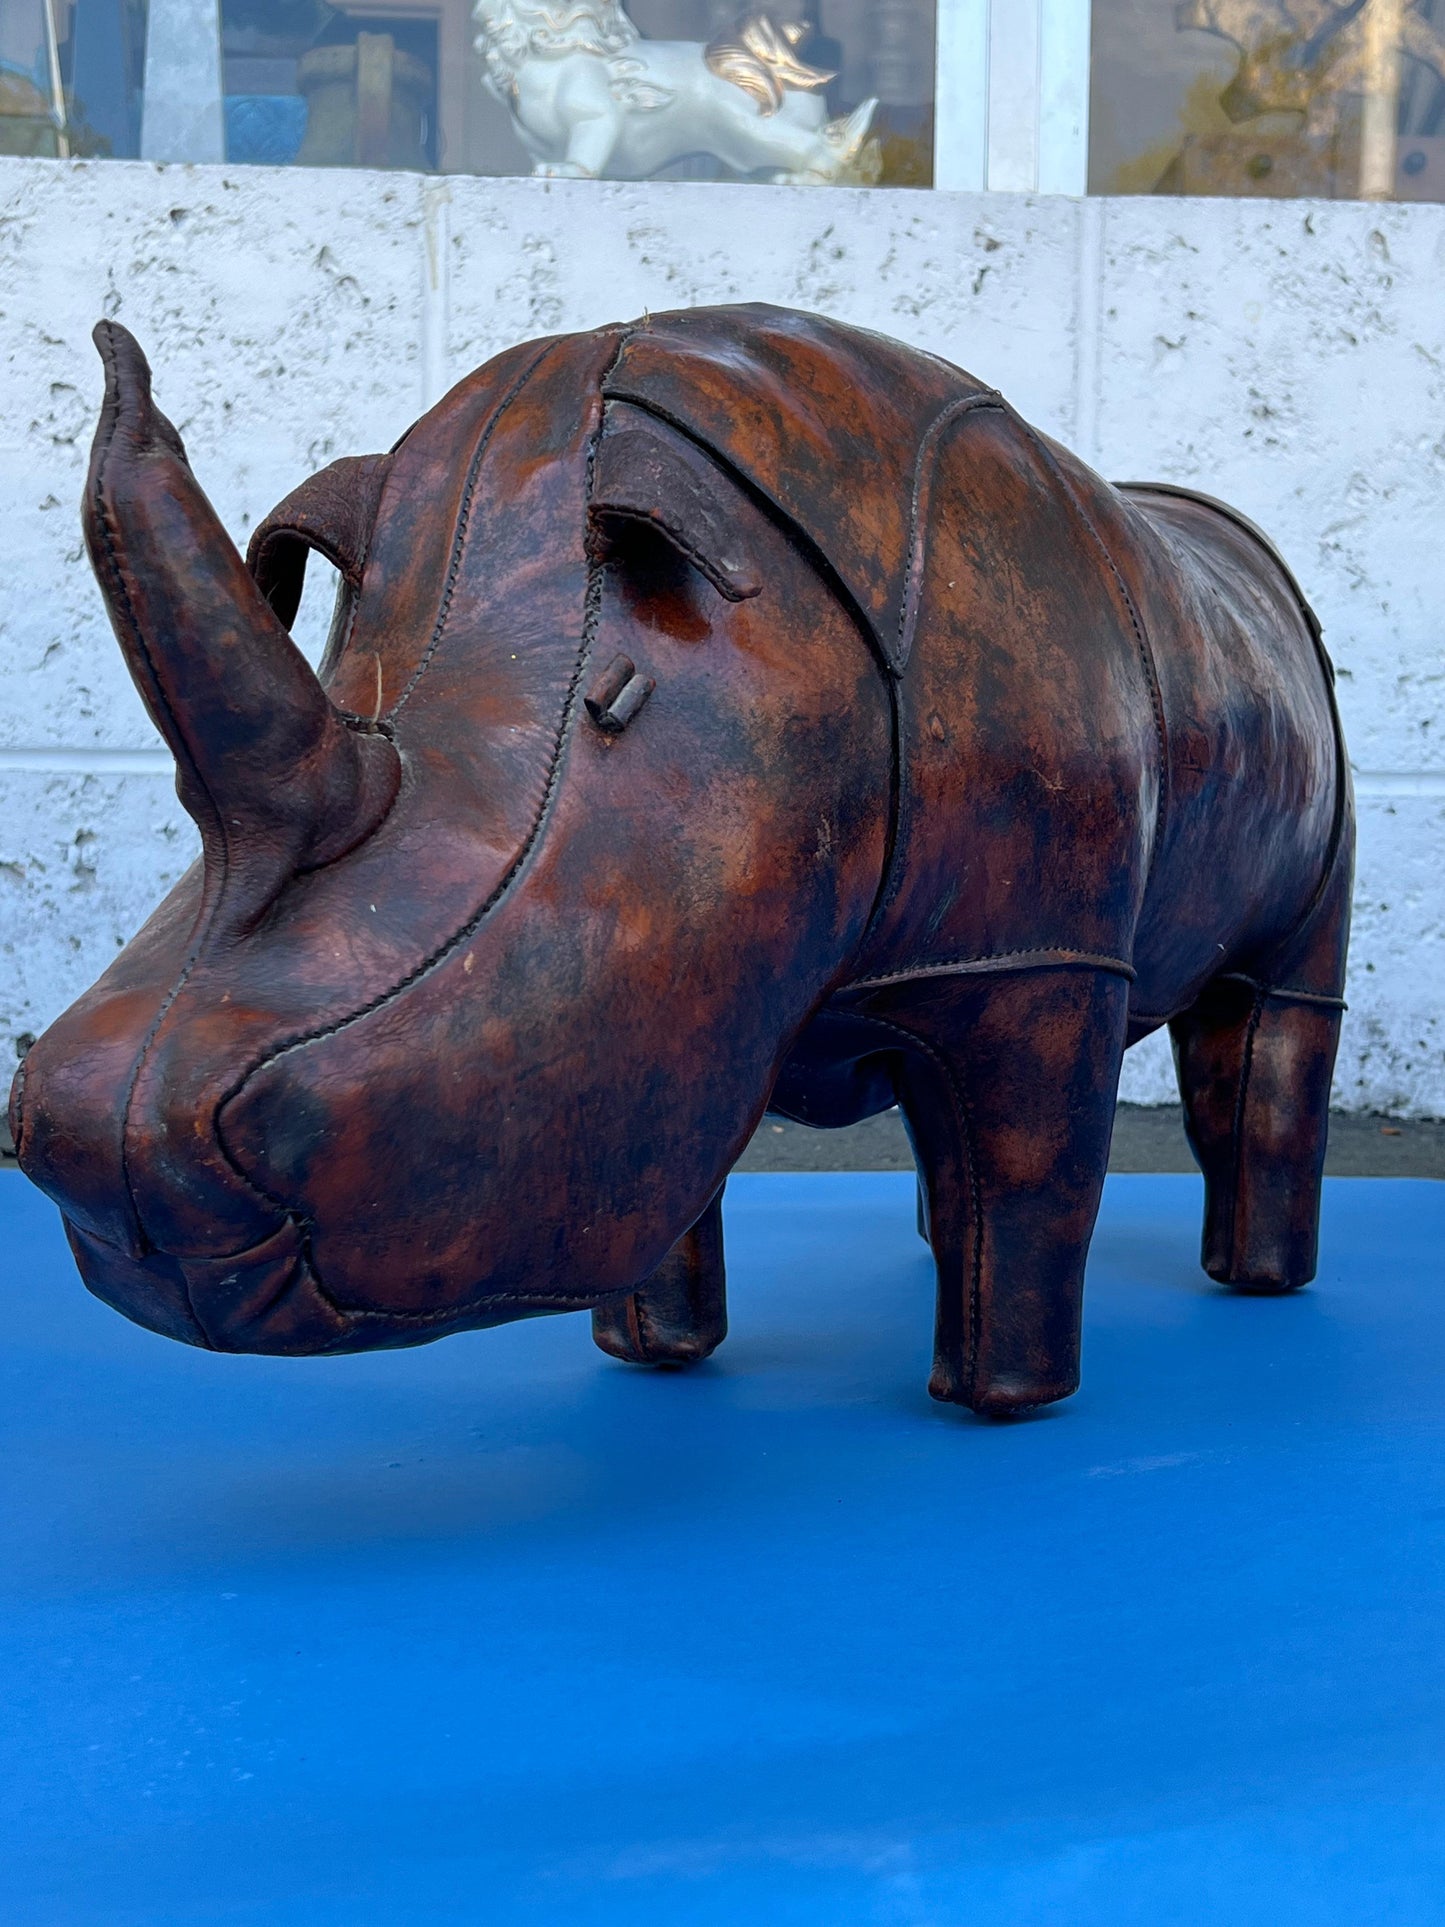 Vintage Leather Rhino Footstool by Abercrombie & Fitch, 1950s